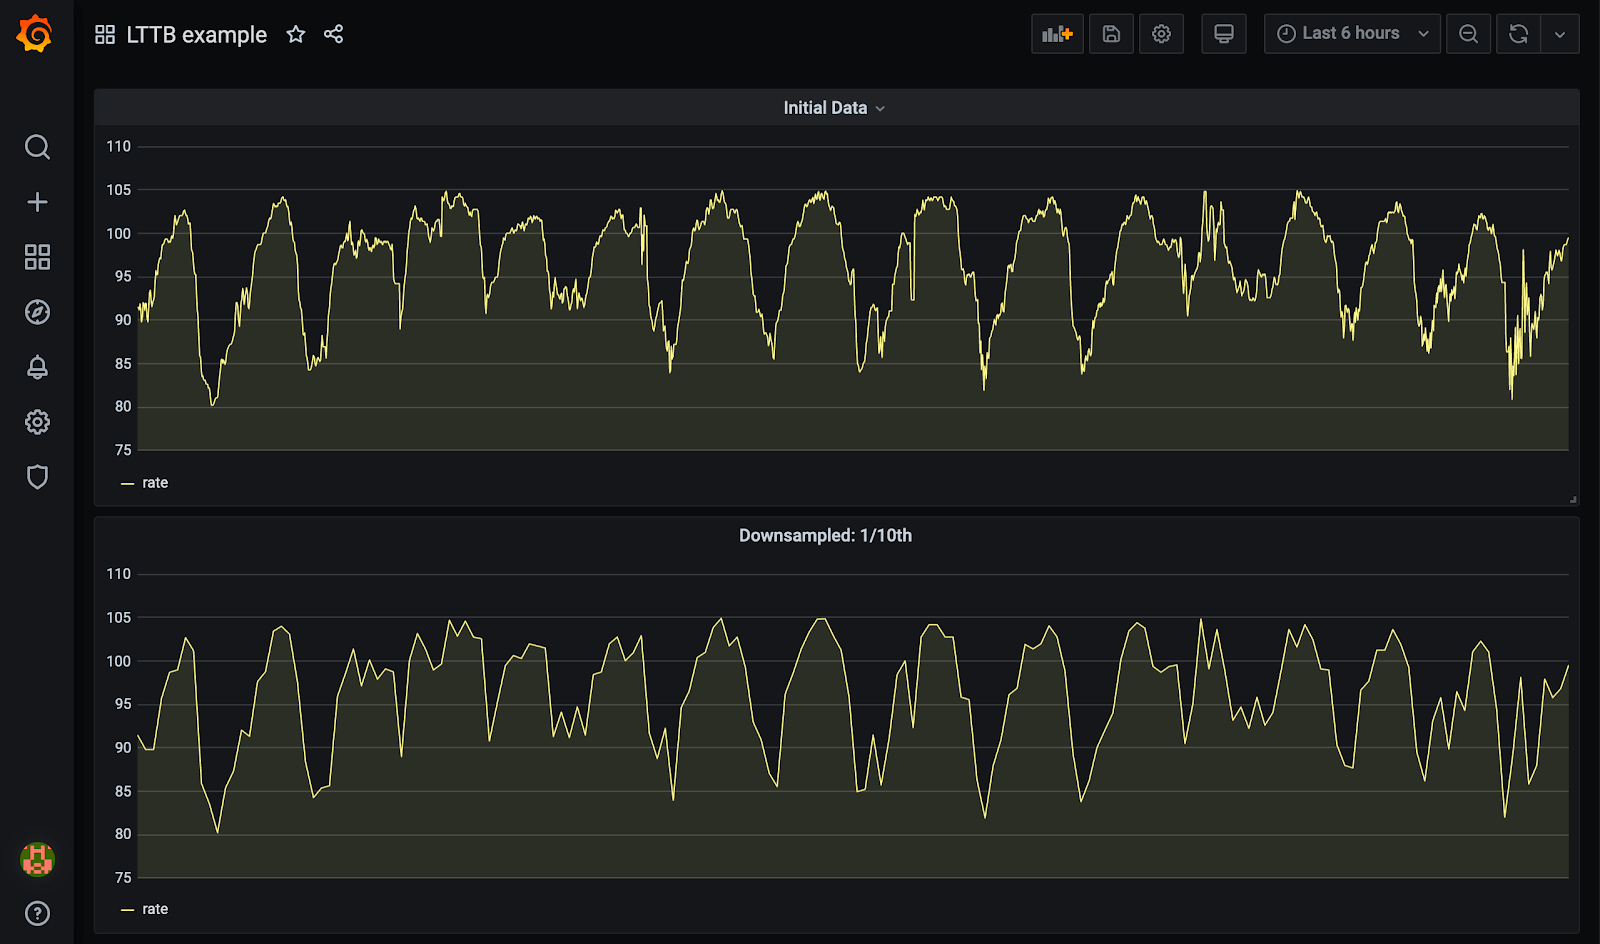 Grafana dashboard UI, showing initial and downsampled data